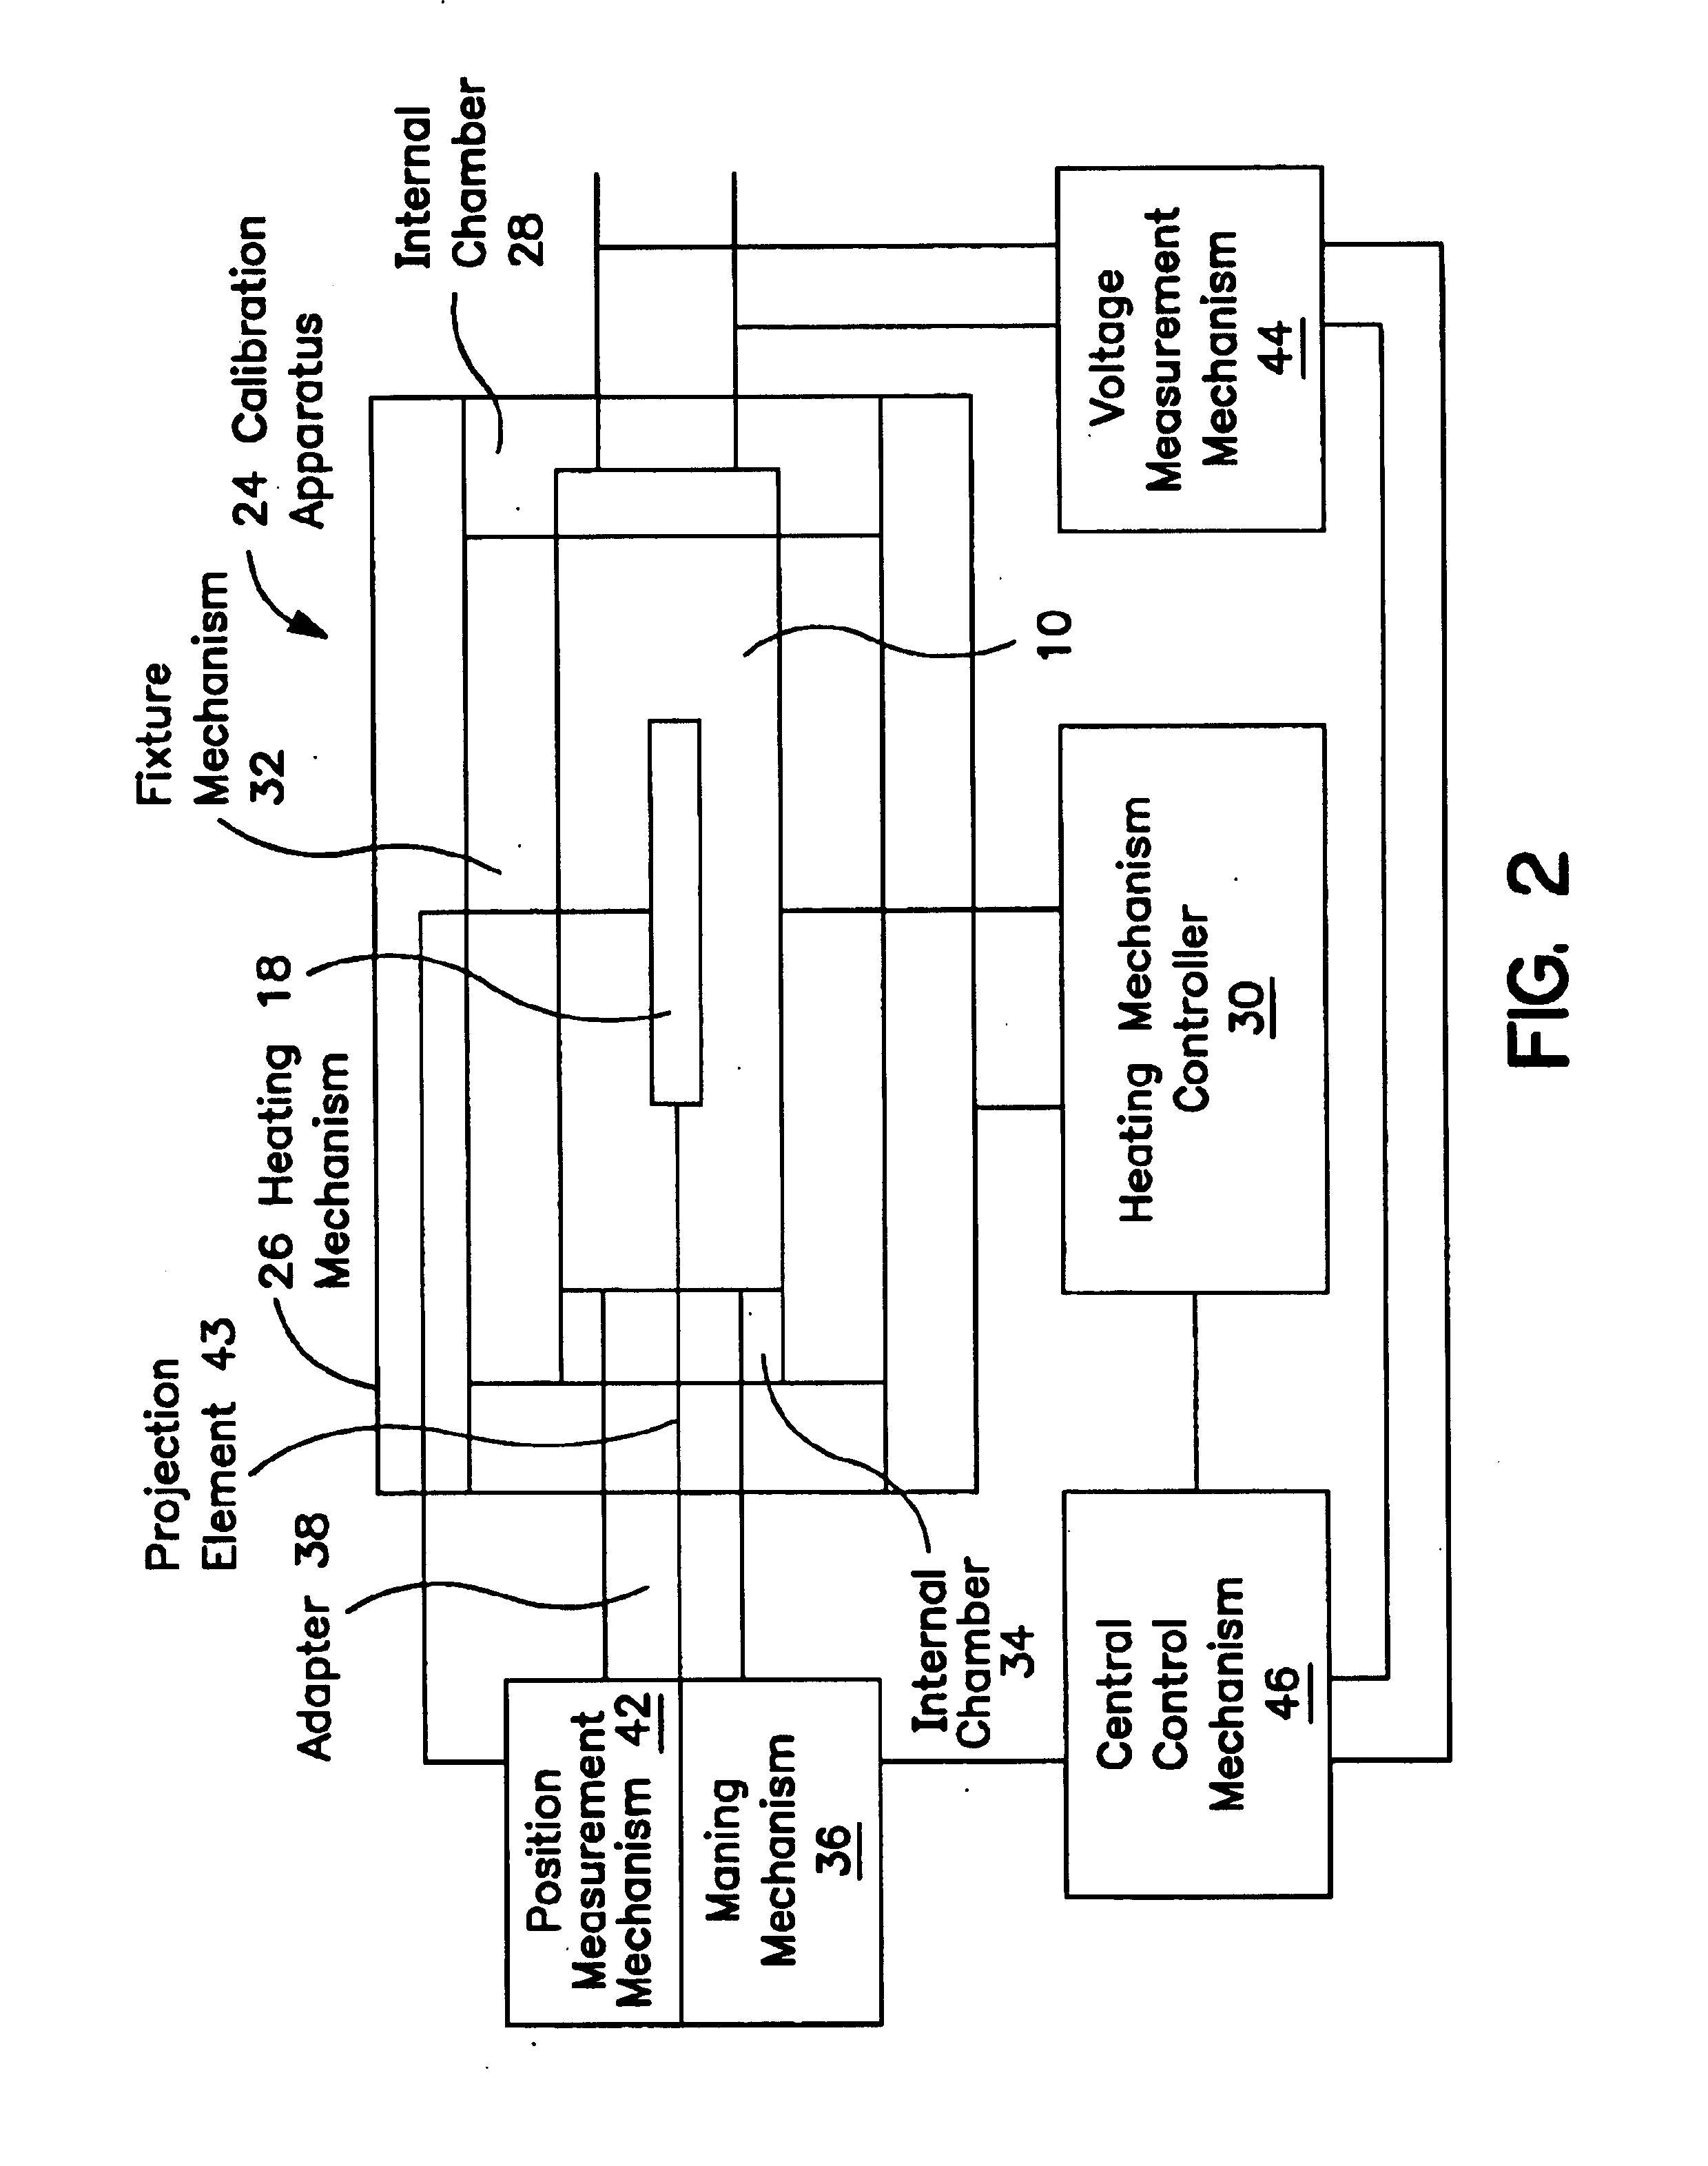 Method and apparatus for calibrating a linear variable differential transformer